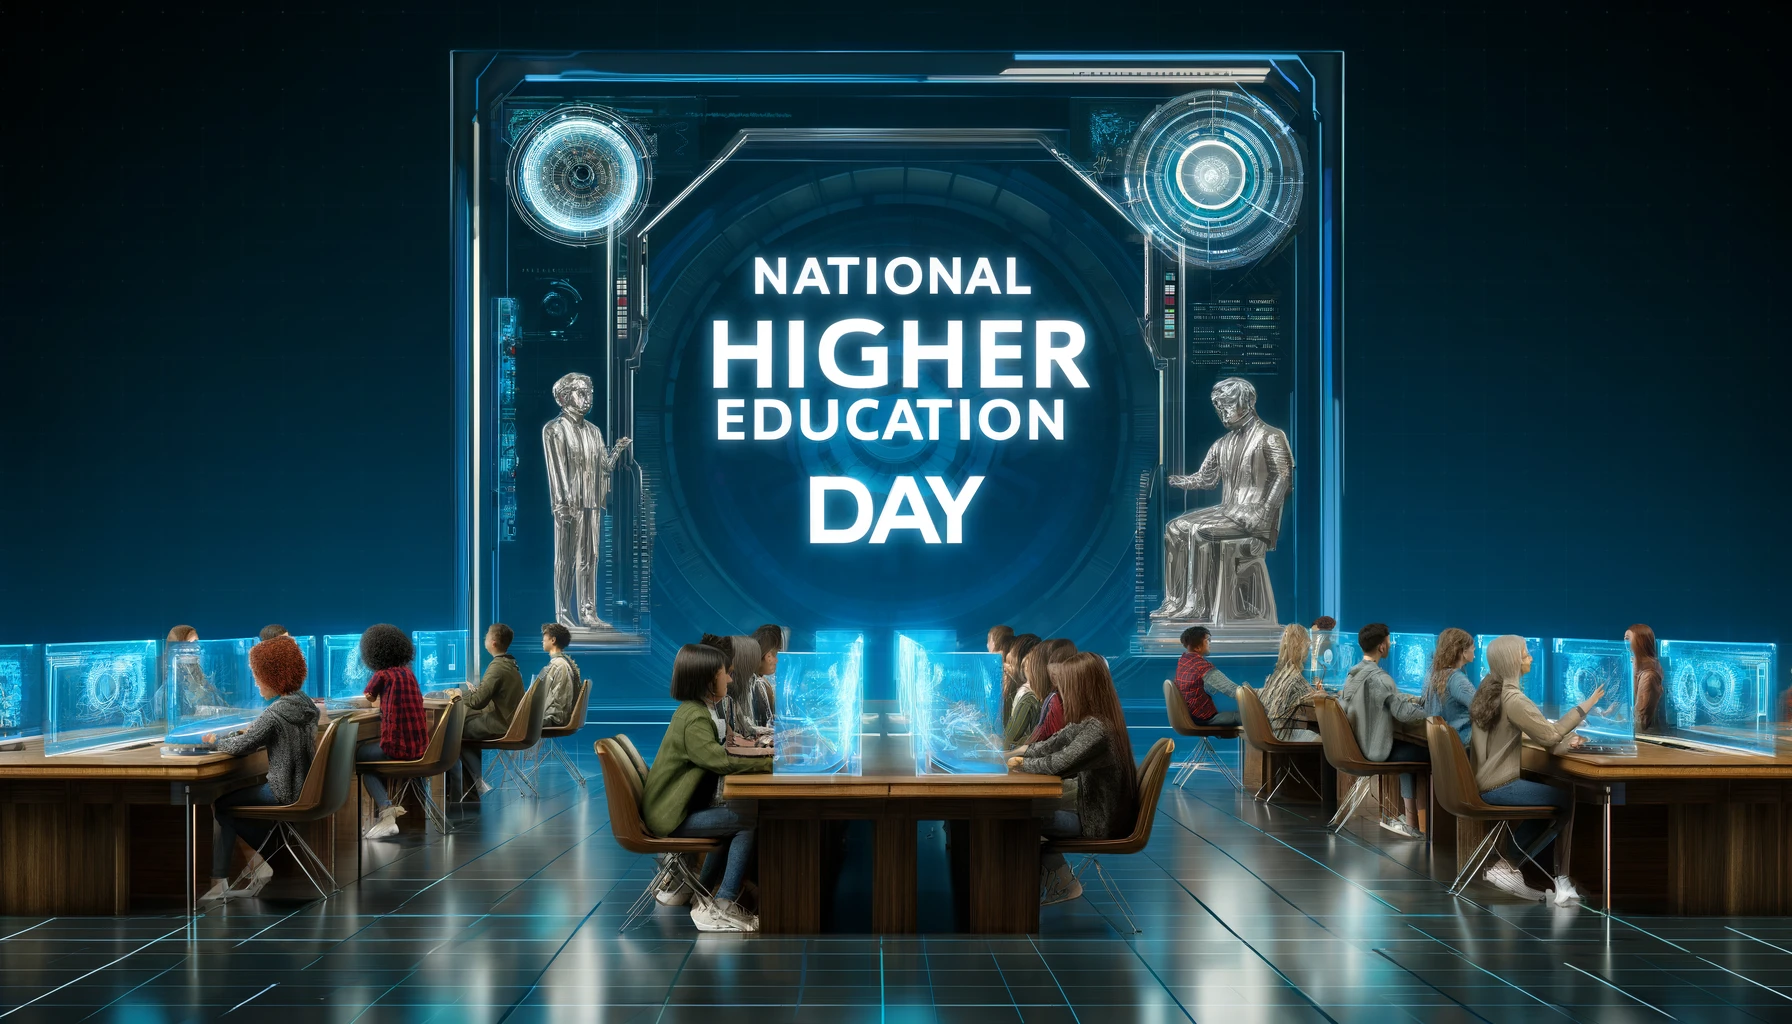 Encouraging Messages for National Higher Education Day